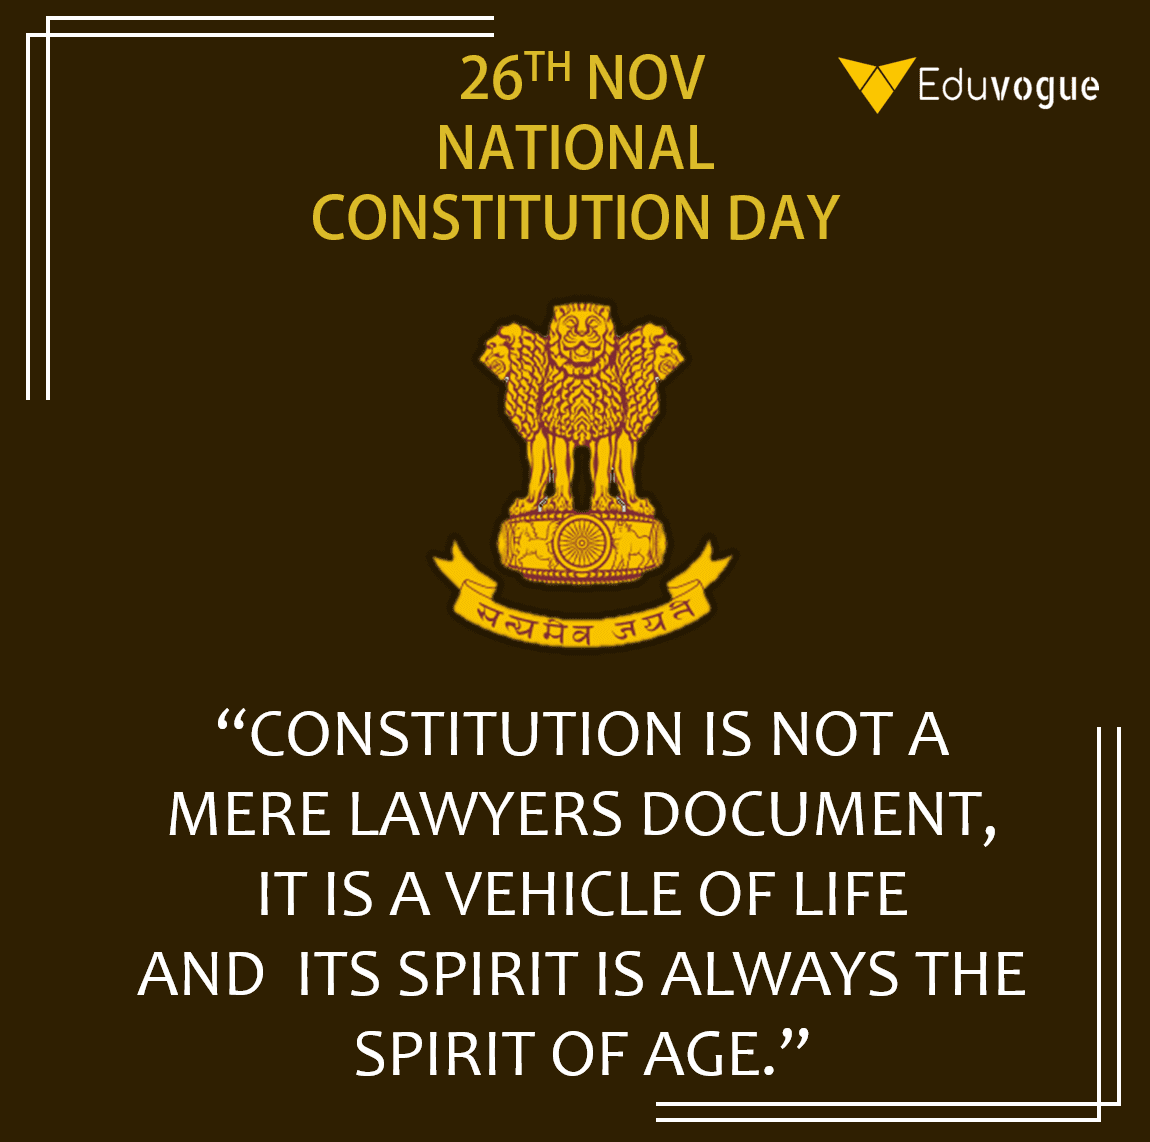 Indian 26TH NOV NATIONAL CONSTITUTION DAY !!!  (National Law Day), also known as